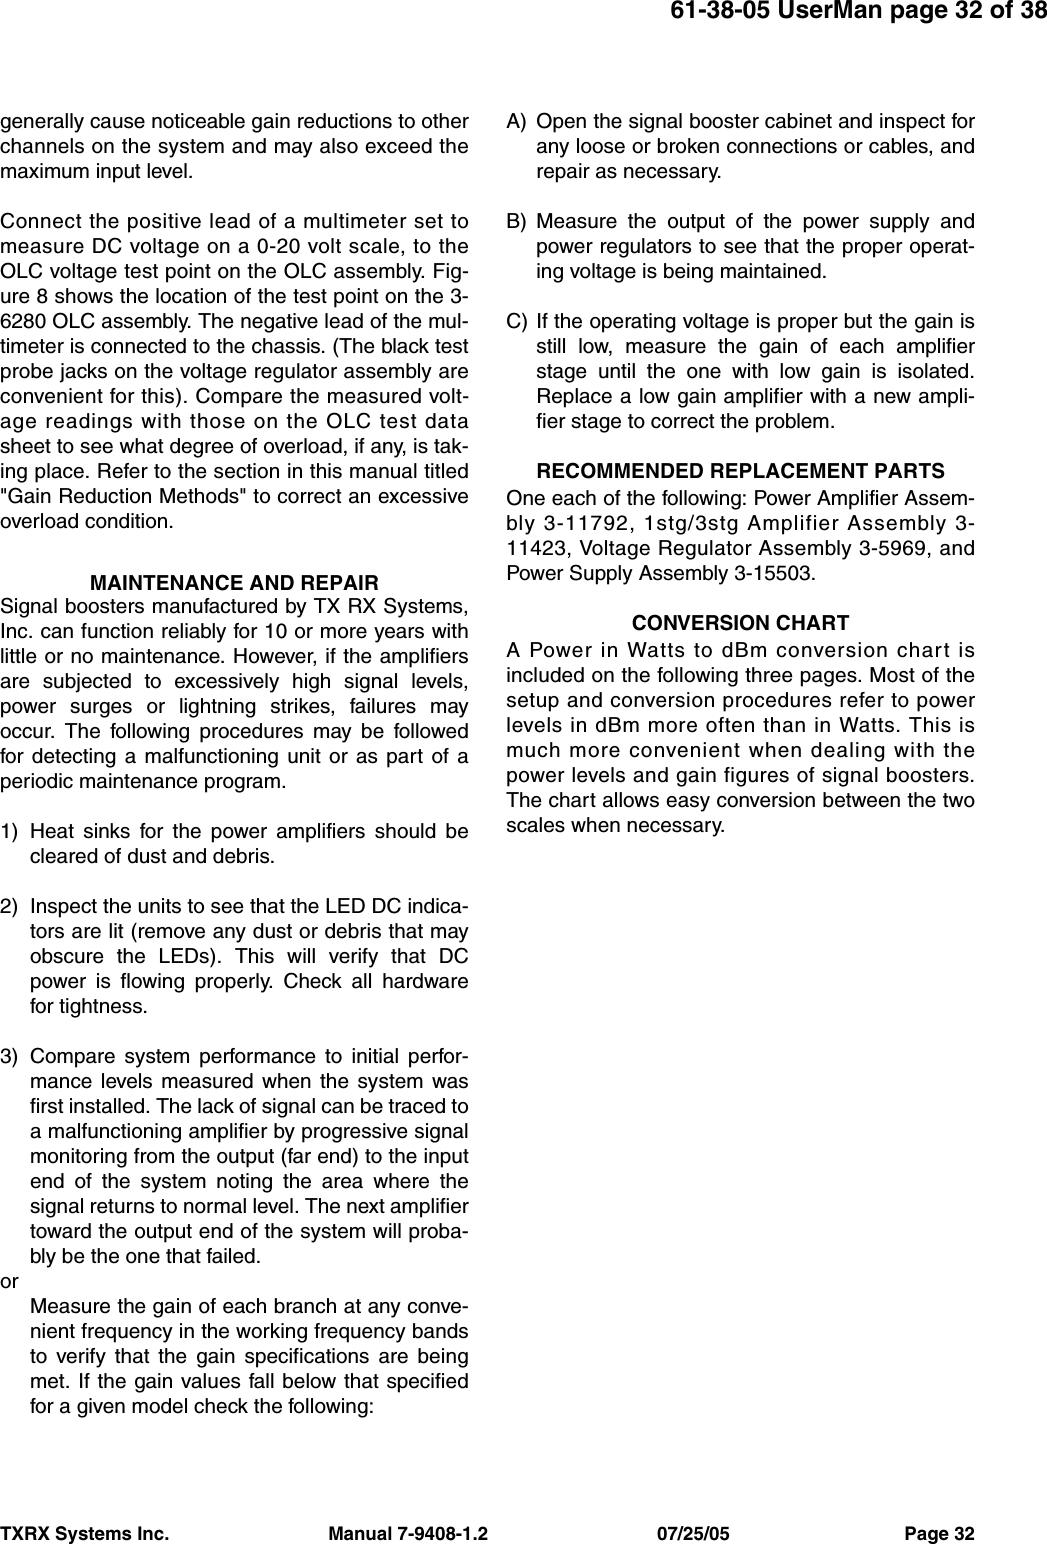 61-38-05 UserMan page 32 of 38TXRX Systems Inc.                               Manual 7-9408-1.2                                 07/25/05                                  Page 32generally cause noticeable gain reductions to otherchannels on the system and may also exceed themaximum input level.Connect the positive lead of a multimeter set tomeasure DC voltage on a 0-20 volt scale, to theOLC voltage test point on the OLC assembly. Fig-ure 8 shows the location of the test point on the 3-6280 OLC assembly. The negative lead of the mul-timeter is connected to the chassis. (The black testprobe jacks on the voltage regulator assembly areconvenient for this). Compare the measured volt-age readings with those on the OLC test datasheet to see what degree of overload, if any, is tak-ing place. Refer to the section in this manual titled&quot;Gain Reduction Methods&quot; to correct an excessiveoverload condition.MAINTENANCE AND REPAIRSignal boosters manufactured by TX RX Systems,Inc. can function reliably for 10 or more years withlittle or no maintenance. However, if the amplifiersare subjected to excessively high signal levels,power surges or lightning strikes, failures mayoccur. The following procedures may be followedfor detecting a malfunctioning unit or as part of aperiodic maintenance program.1) Heat sinks for the power amplifiers should becleared of dust and debris.2) Inspect the units to see that the LED DC indica-tors are lit (remove any dust or debris that mayobscure the LEDs). This will verify that DCpower is flowing properly. Check all hardwarefor tightness.3) Compare system performance to initial perfor-mance levels measured when the system wasfirst installed. The lack of signal can be traced toa malfunctioning amplifier by progressive signalmonitoring from the output (far end) to the inputend of the system noting the area where thesignal returns to normal level. The next amplifiertoward the output end of the system will proba-bly be the one that failed.orMeasure the gain of each branch at any conve-nient frequency in the working frequency bandsto verify that the gain specifications are beingmet. If the gain values fall below that specifiedfor a given model check the following:A) Open the signal booster cabinet and inspect forany loose or broken connections or cables, andrepair as necessary.B) Measure the output of the power supply andpower regulators to see that the proper operat-ing voltage is being maintained.C) If the operating voltage is proper but the gain isstill low, measure the gain of each amplifierstage until the one with low gain is isolated.Replace a low gain amplifier with a new ampli-fier stage to correct the problem.RECOMMENDED REPLACEMENT PARTSOne each of the following: Power Amplifier Assem-bly 3-11792, 1stg/3stg Amplifier Assembly 3-11423, Voltage Regulator Assembly 3-5969, andPower Supply Assembly 3-15503.CONVERSION CHARTA Power in Watts to dBm conversion chart isincluded on the following three pages. Most of thesetup and conversion procedures refer to powerlevels in dBm more often than in Watts. This ismuch more convenient when dealing with thepower levels and gain figures of signal boosters.The chart allows easy conversion between the twoscales when necessary.